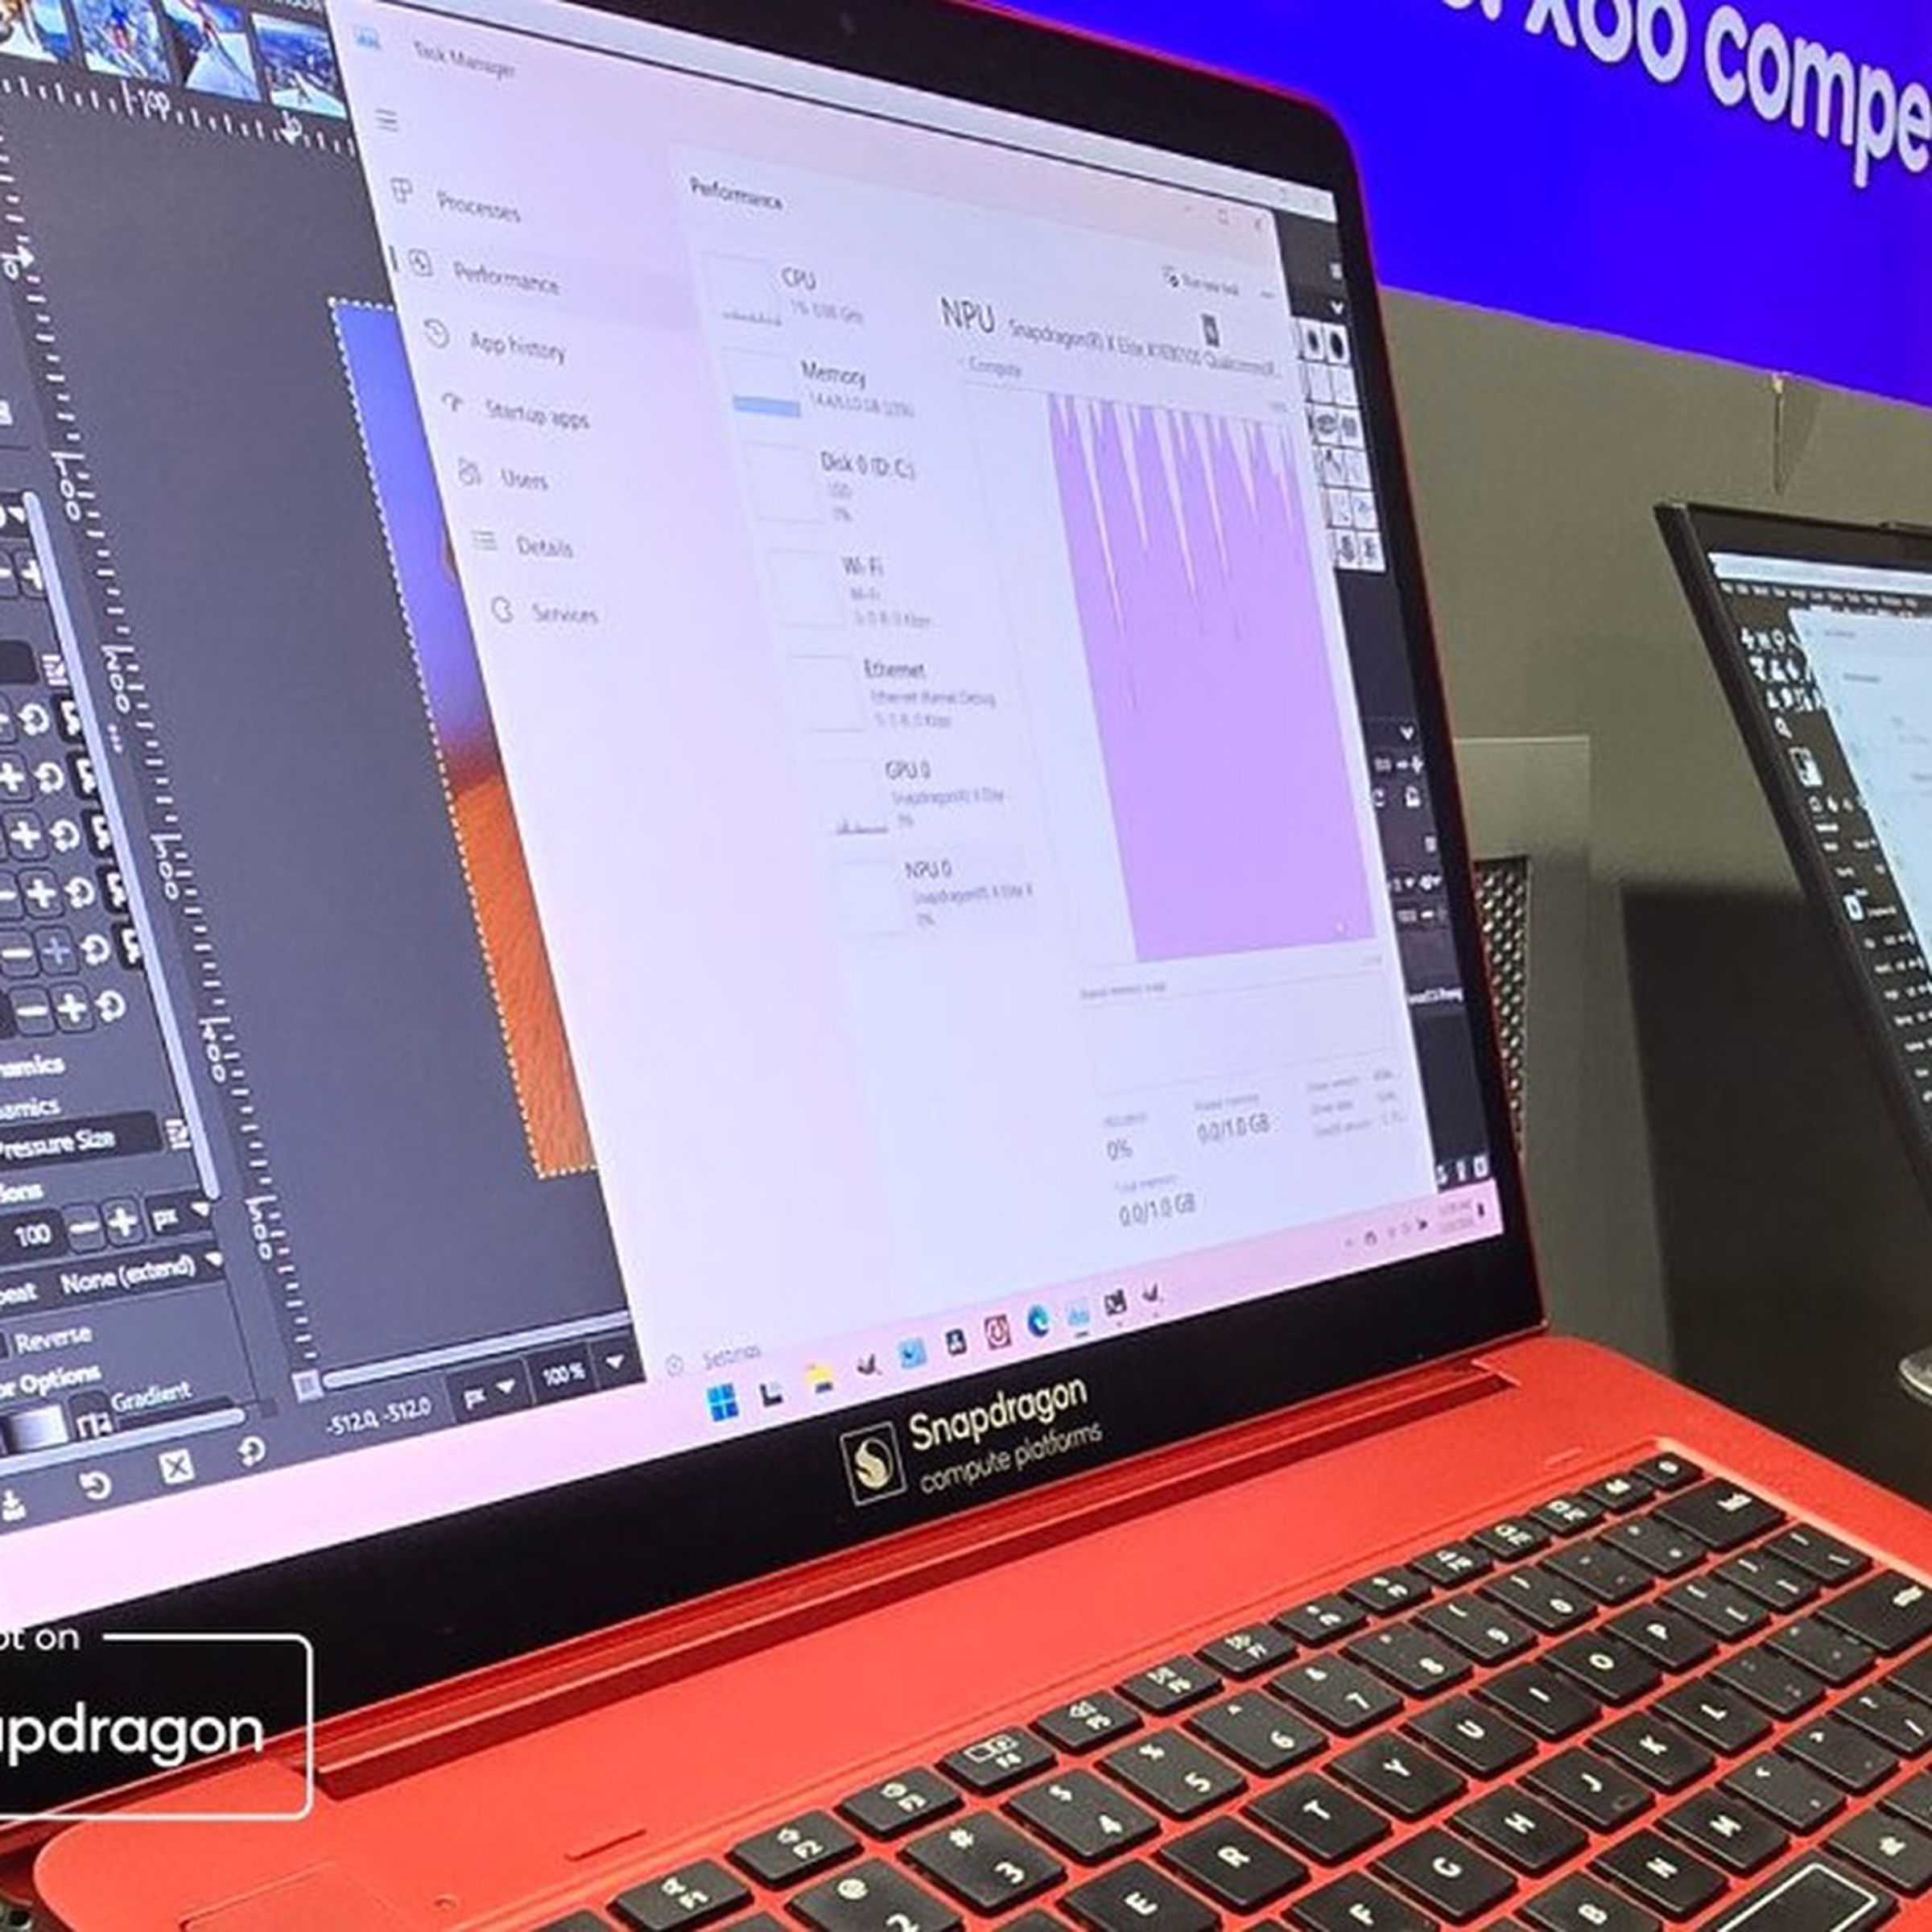 The red Snapdragon X Elite reference design laptop Qualcomm used to show off the games.